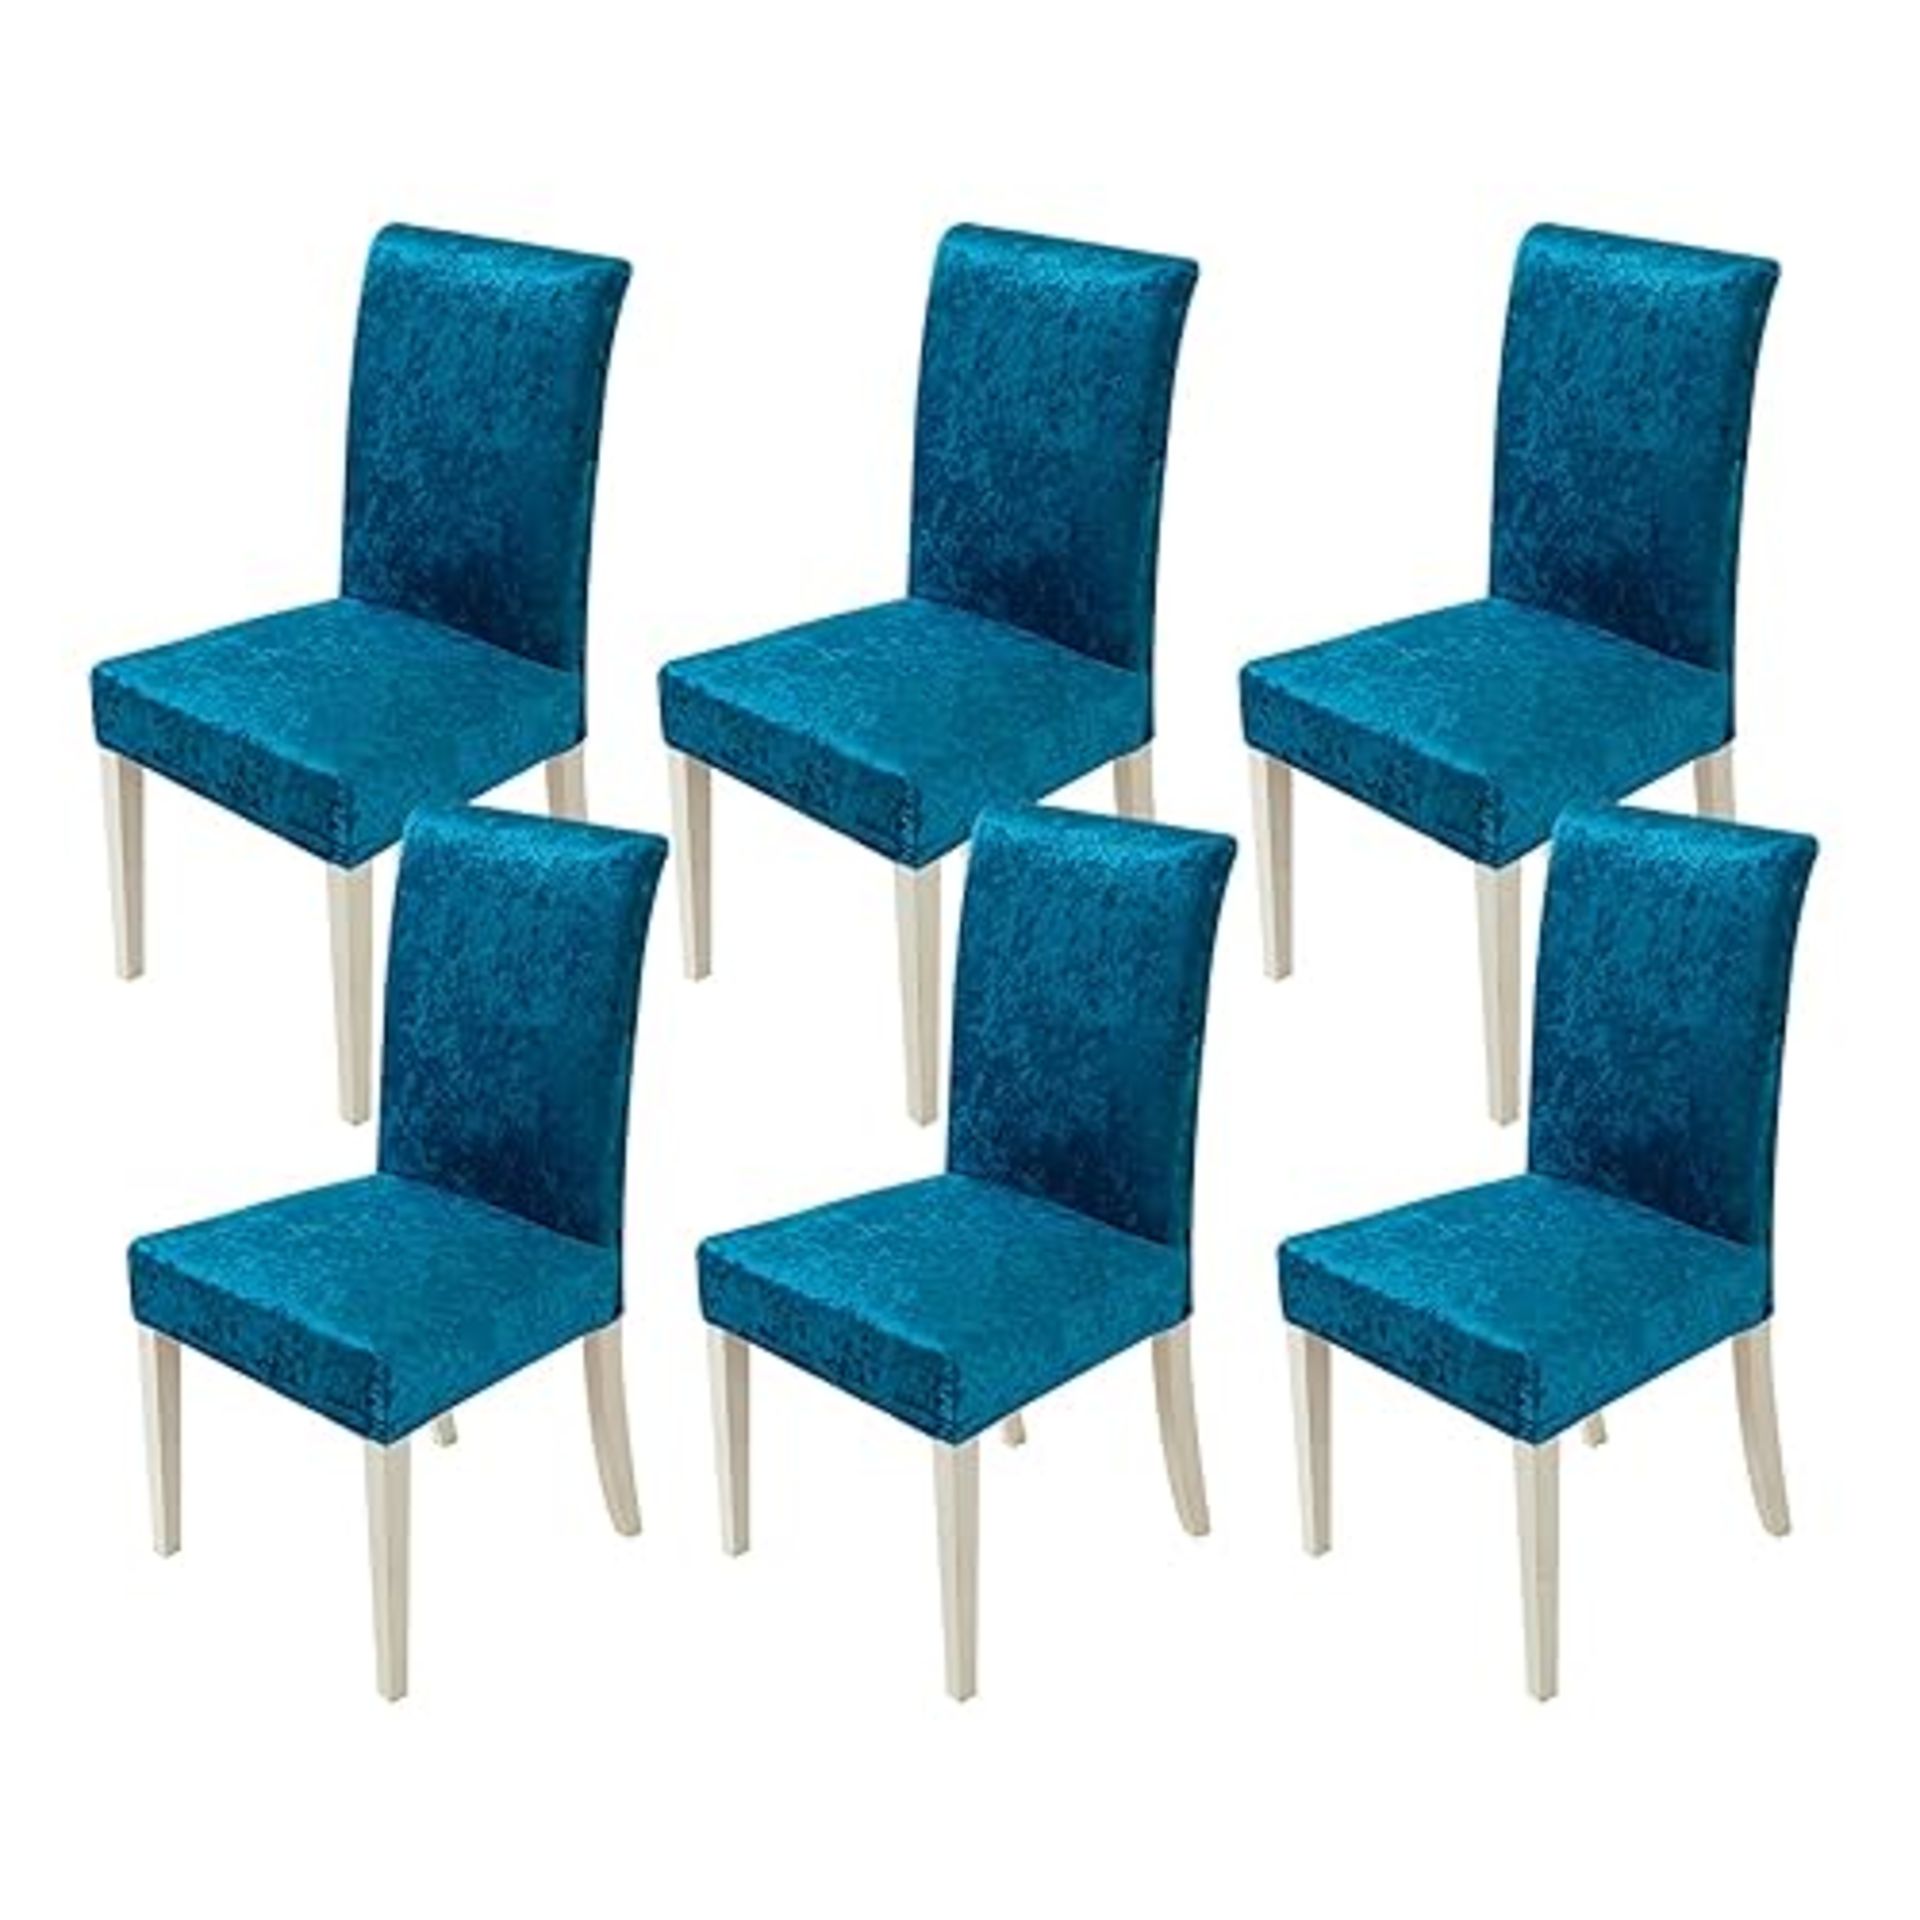 MIULEE Chair Covers for Dining Chairs Set of 6 Velvet Dining Chair Modern Slipcovers Stretch Seat C